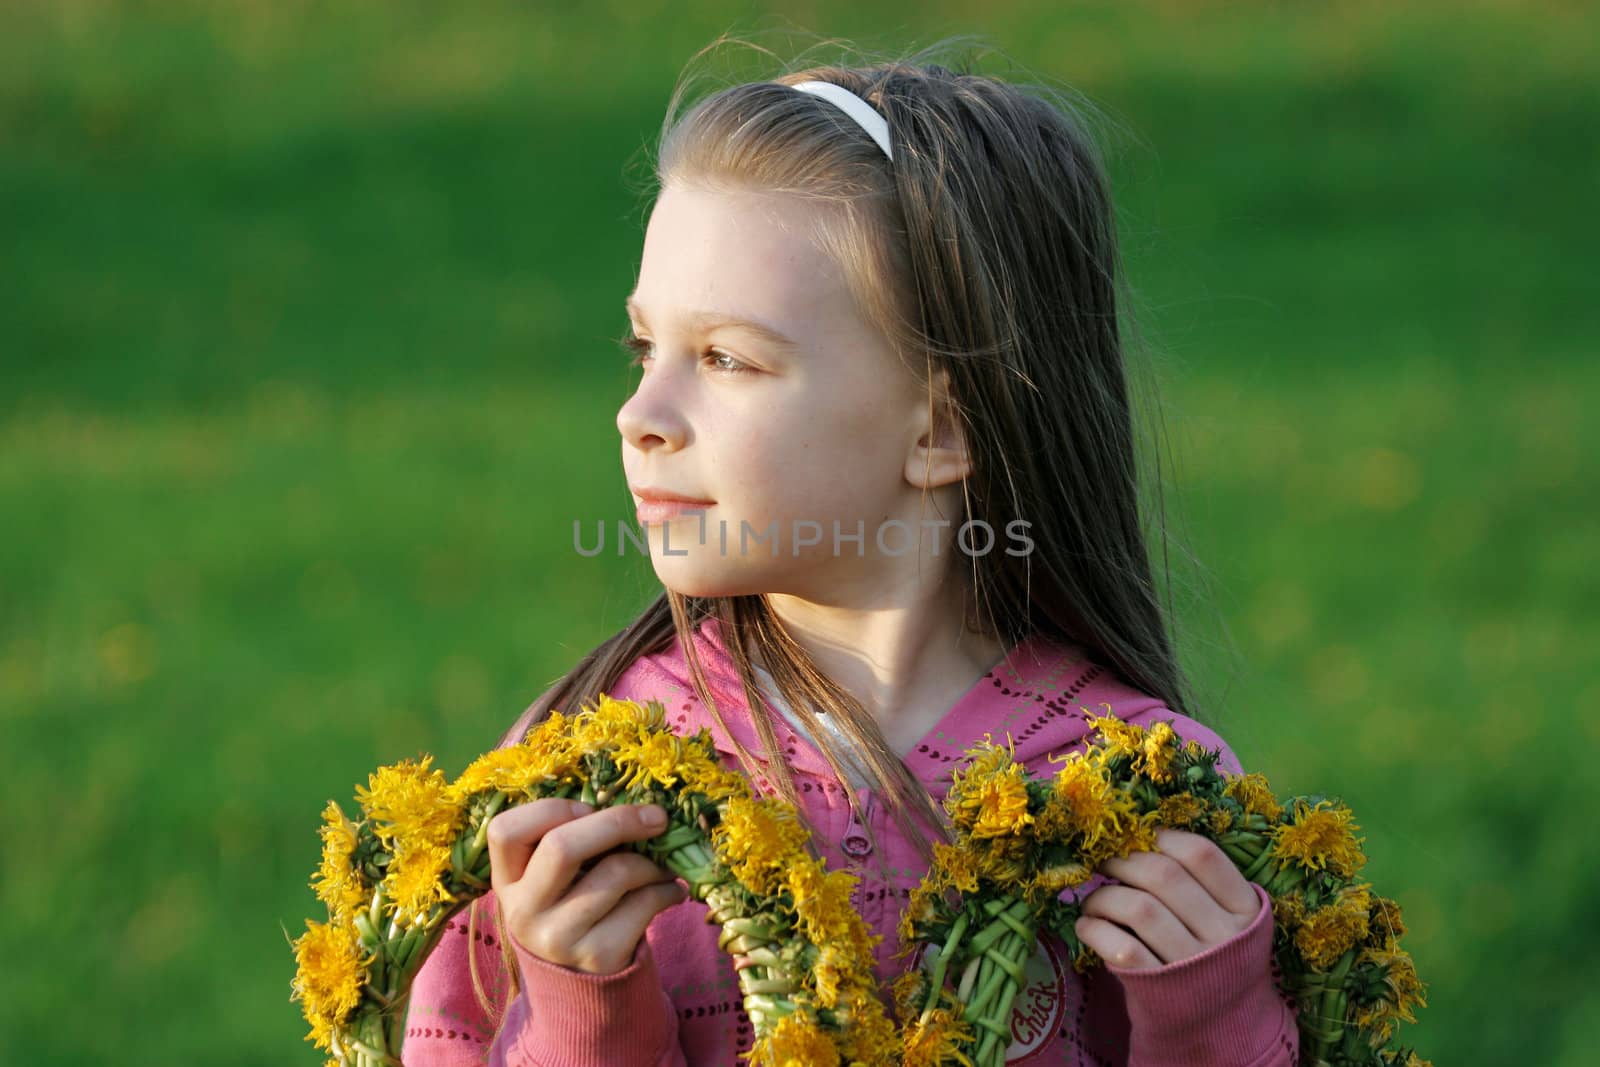 Nice, young girl enjoy summer time in the dandelion meadow.